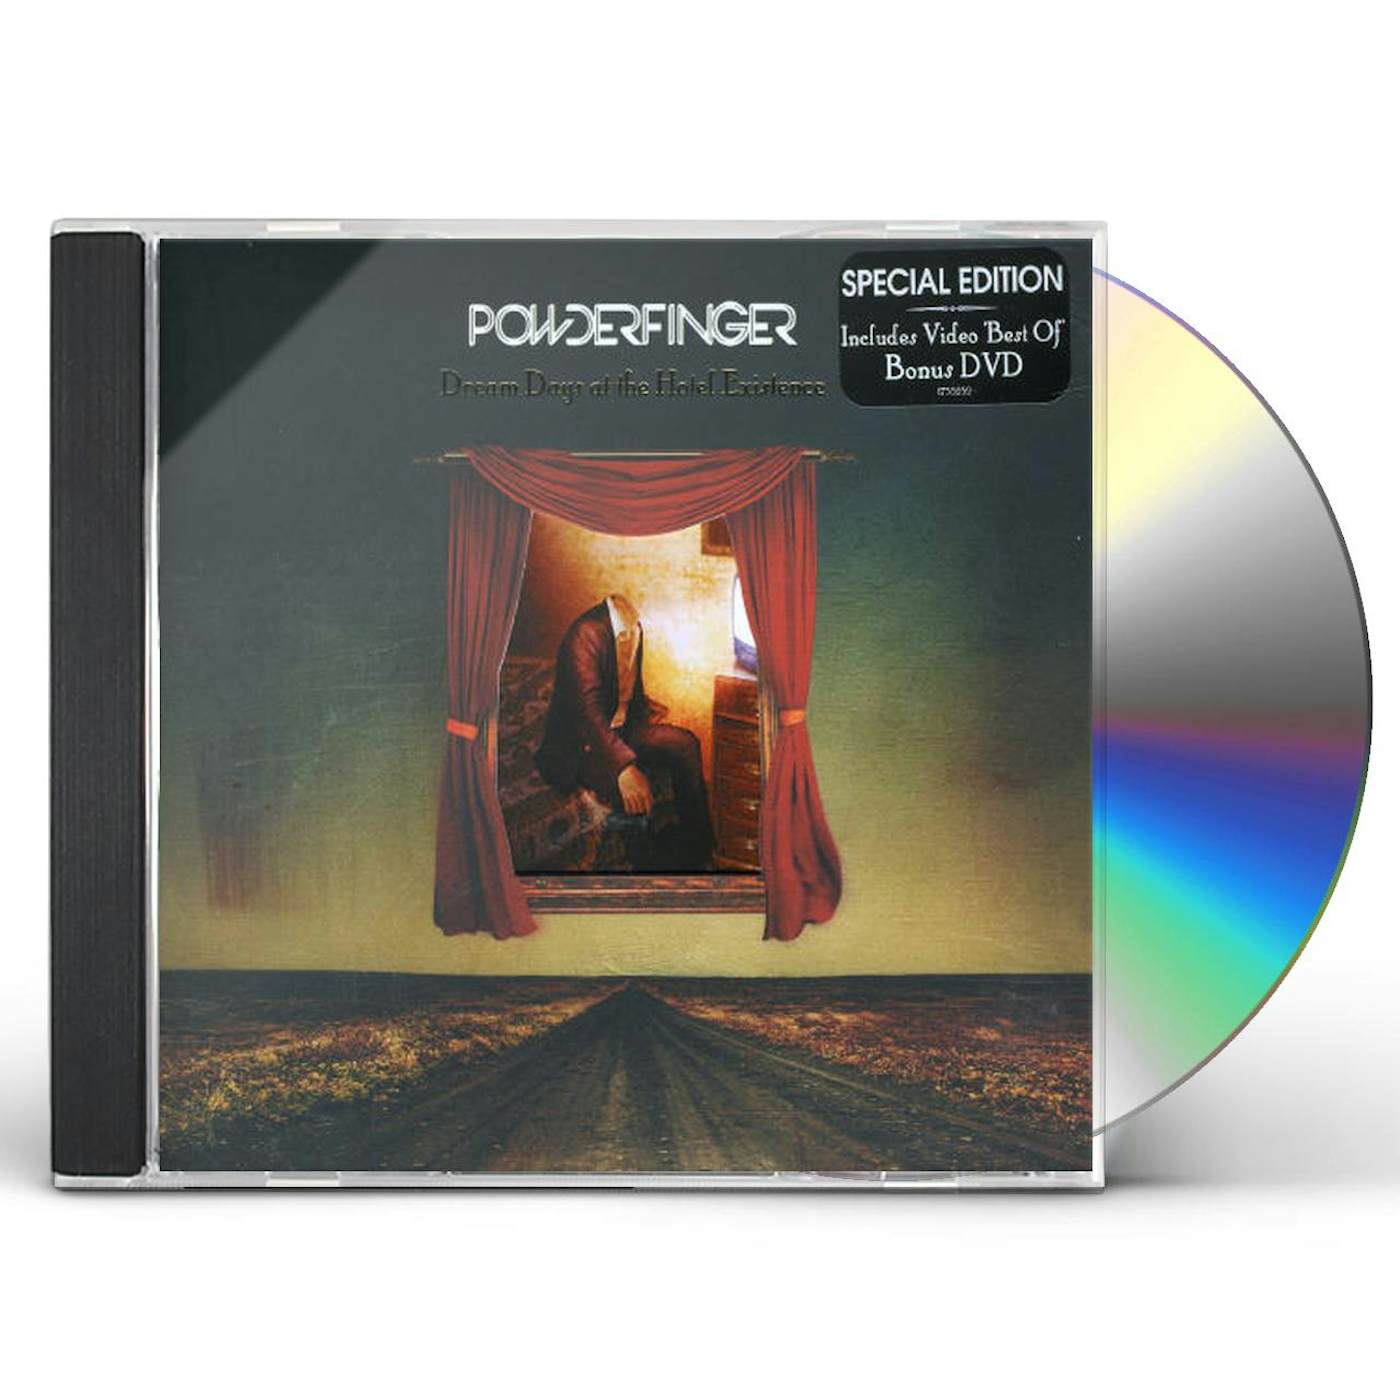 Powderfinger DREAM DAYS AT THE HOTEL EXISTENCE CD